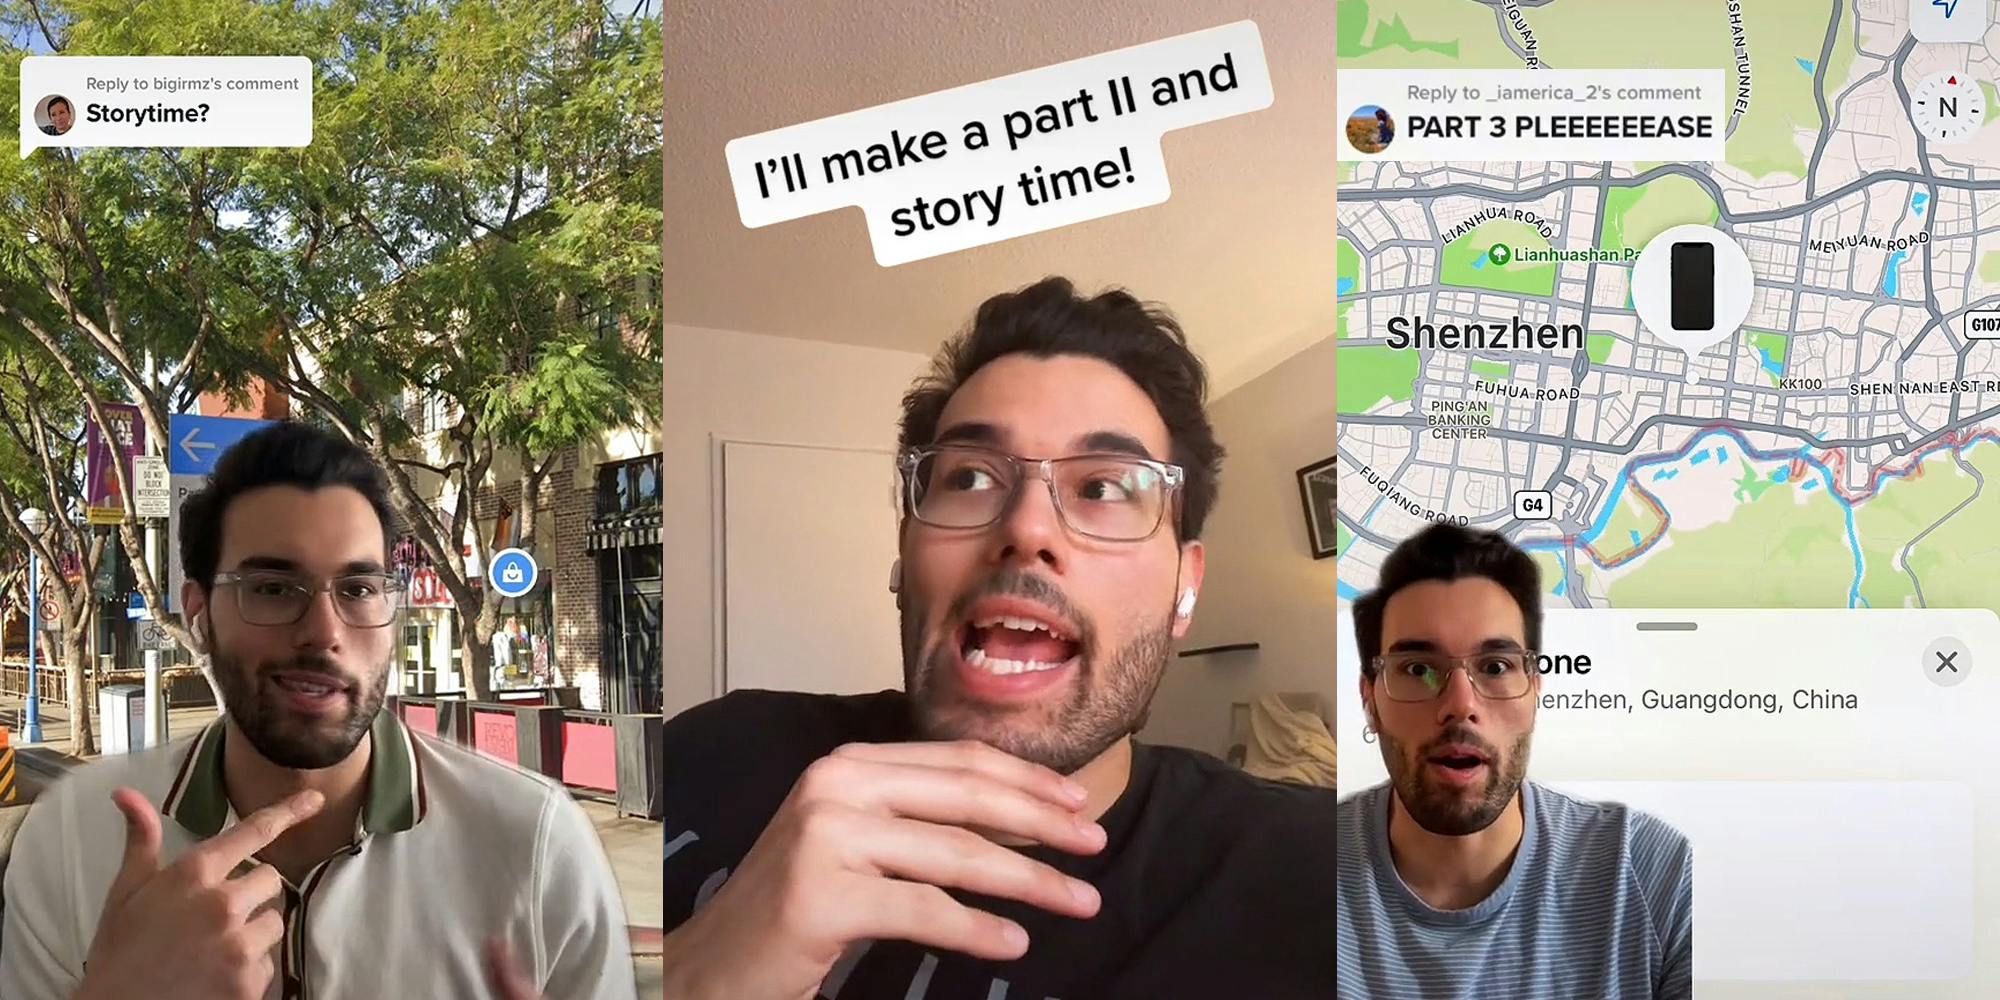 Man greenscreen TikTok pointing to image of street and restaurant caption "Storytime?" (l) Man speaking hand on mouth caption "I'll make a apart 2 and storytime!" (c) man greenscreen TikTok open mouth shocked over image of map tracking phone caption "PART 3 PLEEEEEEEEASE" (r)